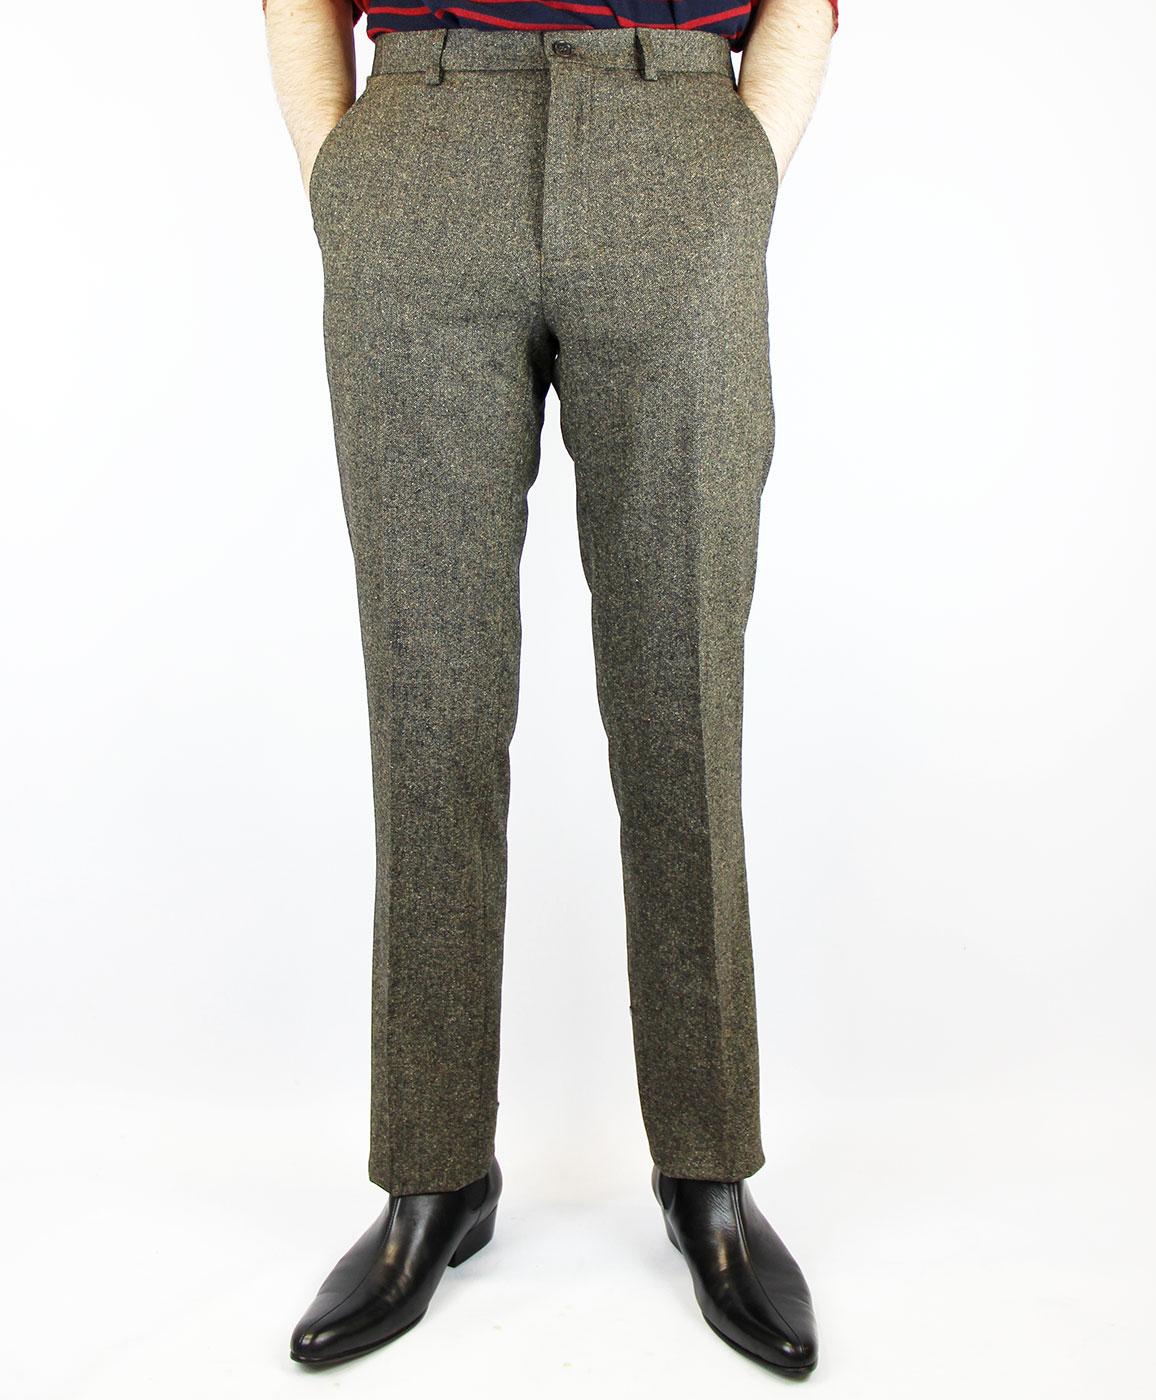 Get the distinctive saltandpepper look and warmth of robust 125oz  pure wool Donegal tweed in these plain front pants Our mas  Tweed pants Tweed  men Pants